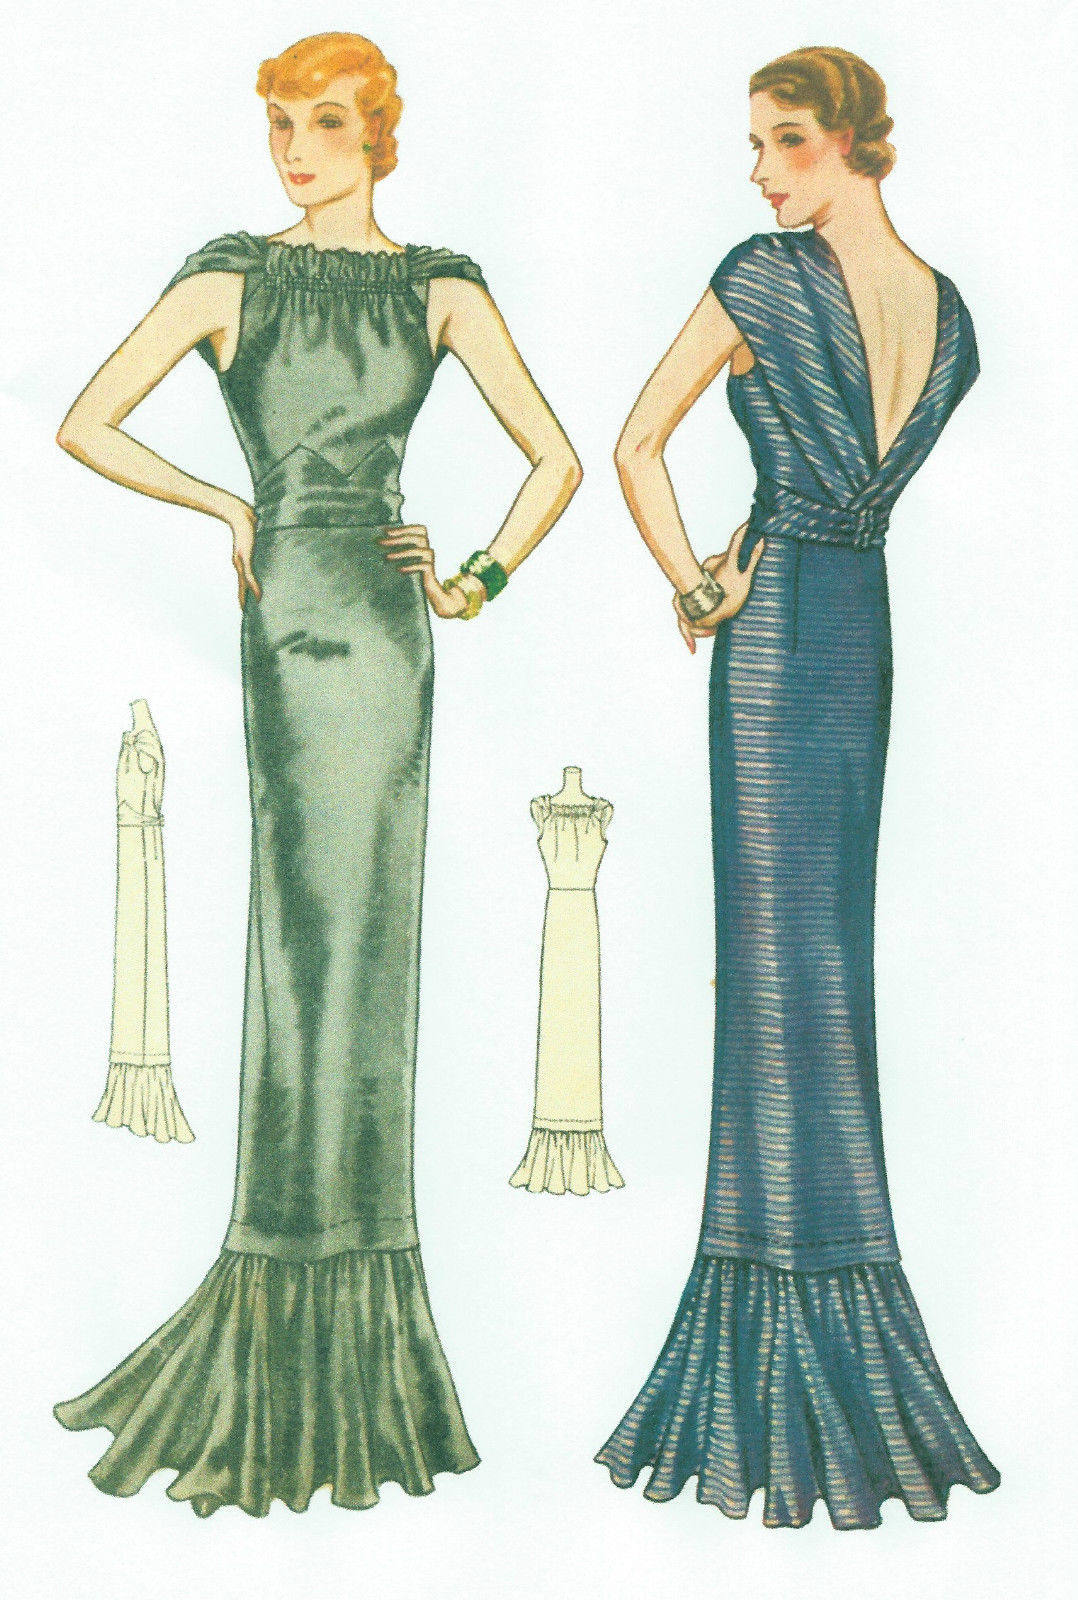 Vintage Sewing Pattern Instructions 1920s Designer Callot Soeurs Draped Evening  Gown E-book 3010 INSTANT DOWNLOAD - Etsy | Vintage sewing patterns, Evening  dress patterns, Evening gown pattern